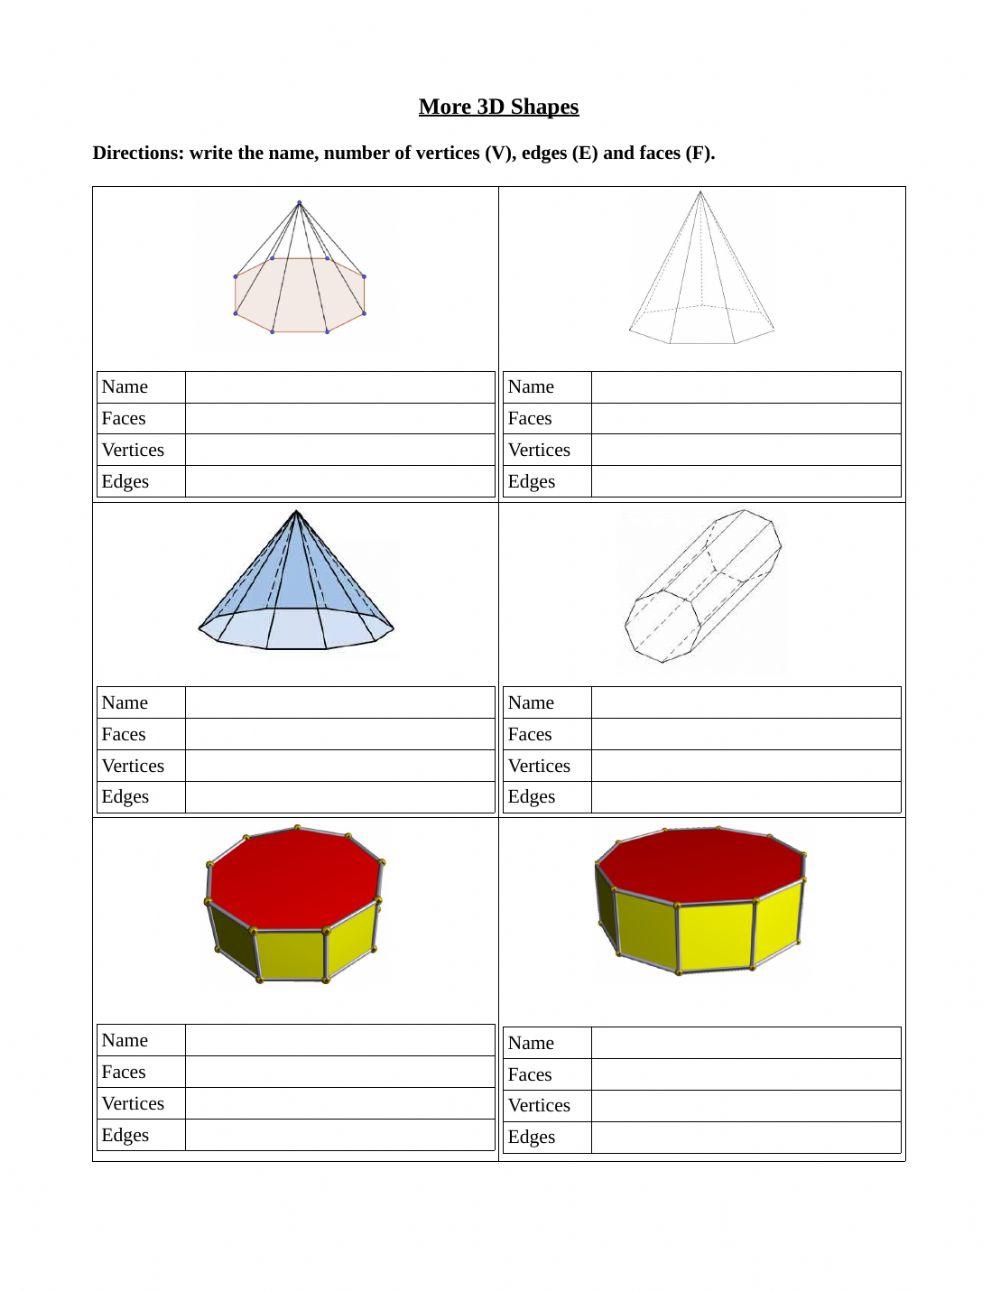 Larger 3D Prisms and Pyramids